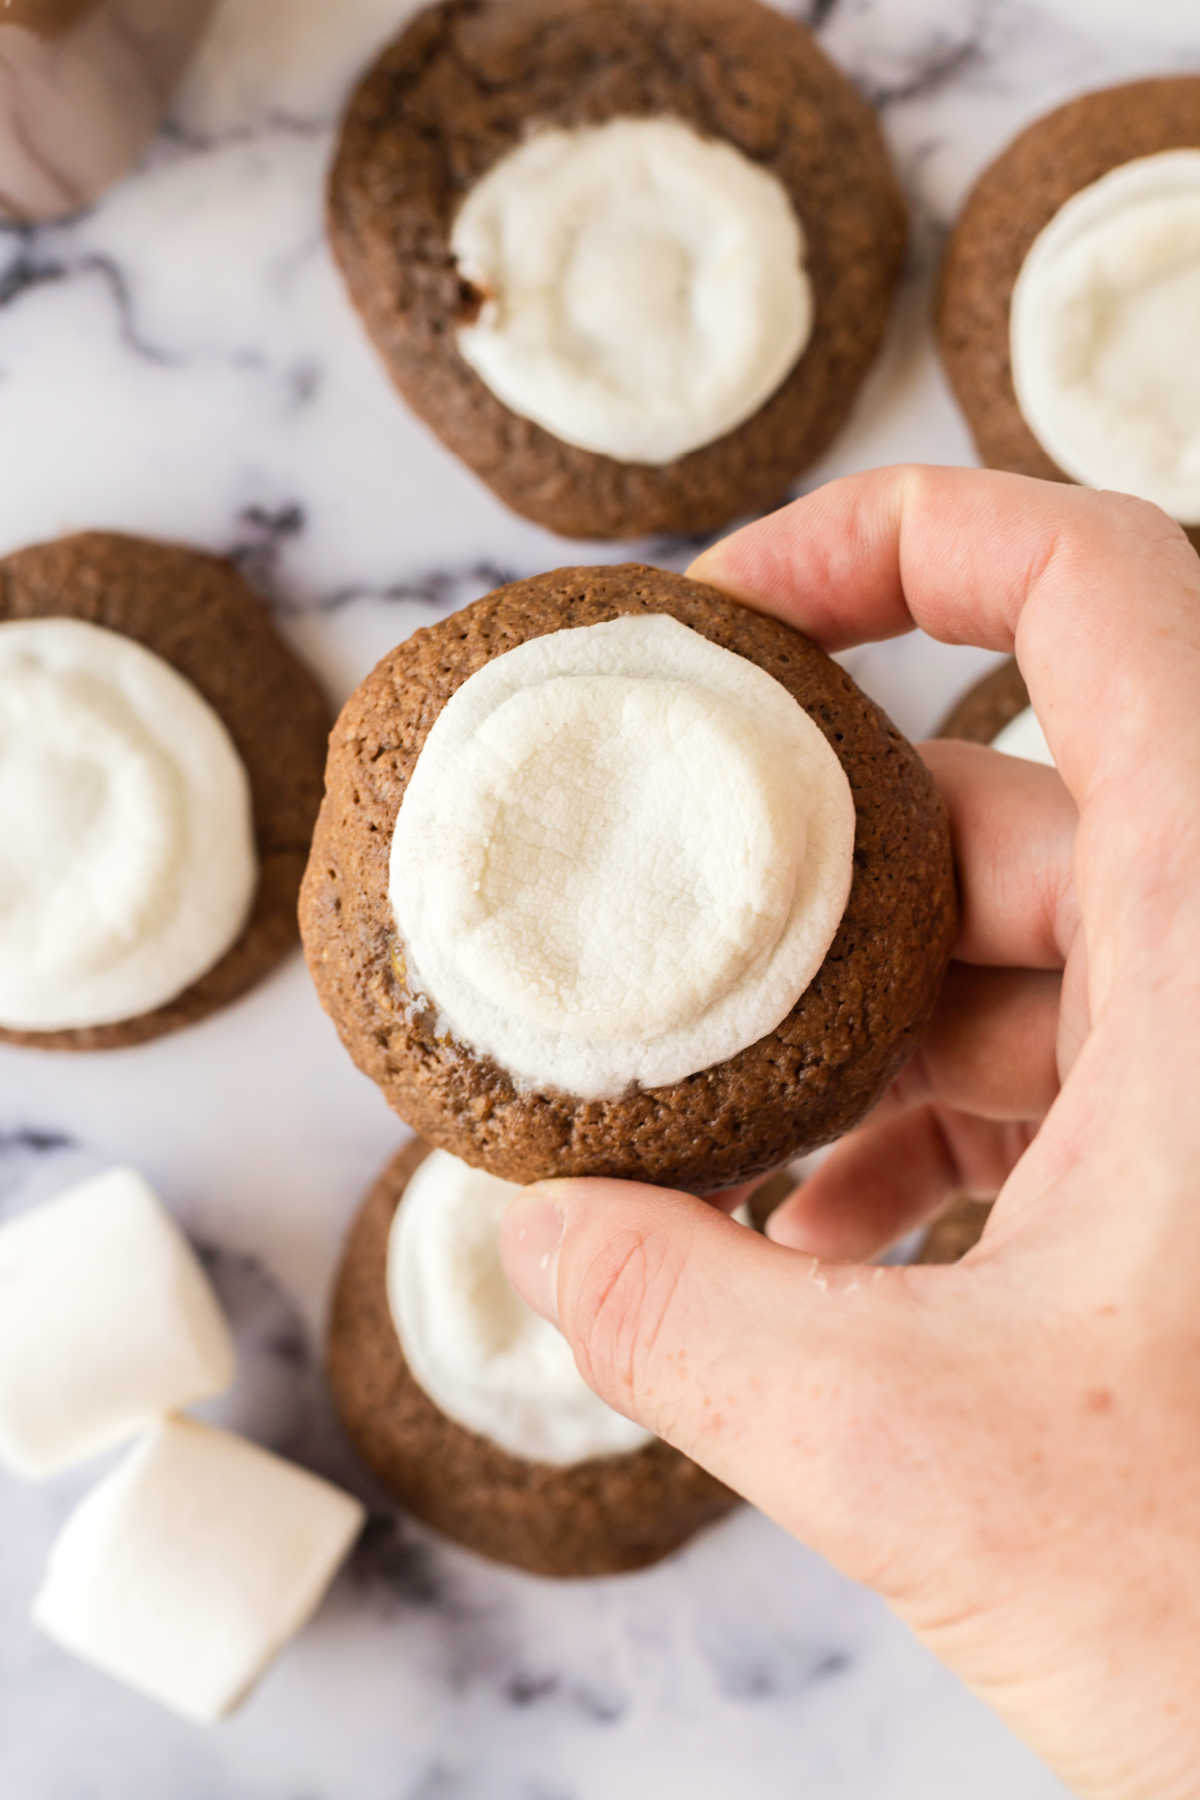 Hand holding hot cocoa cookie with marshmallow baked on top.